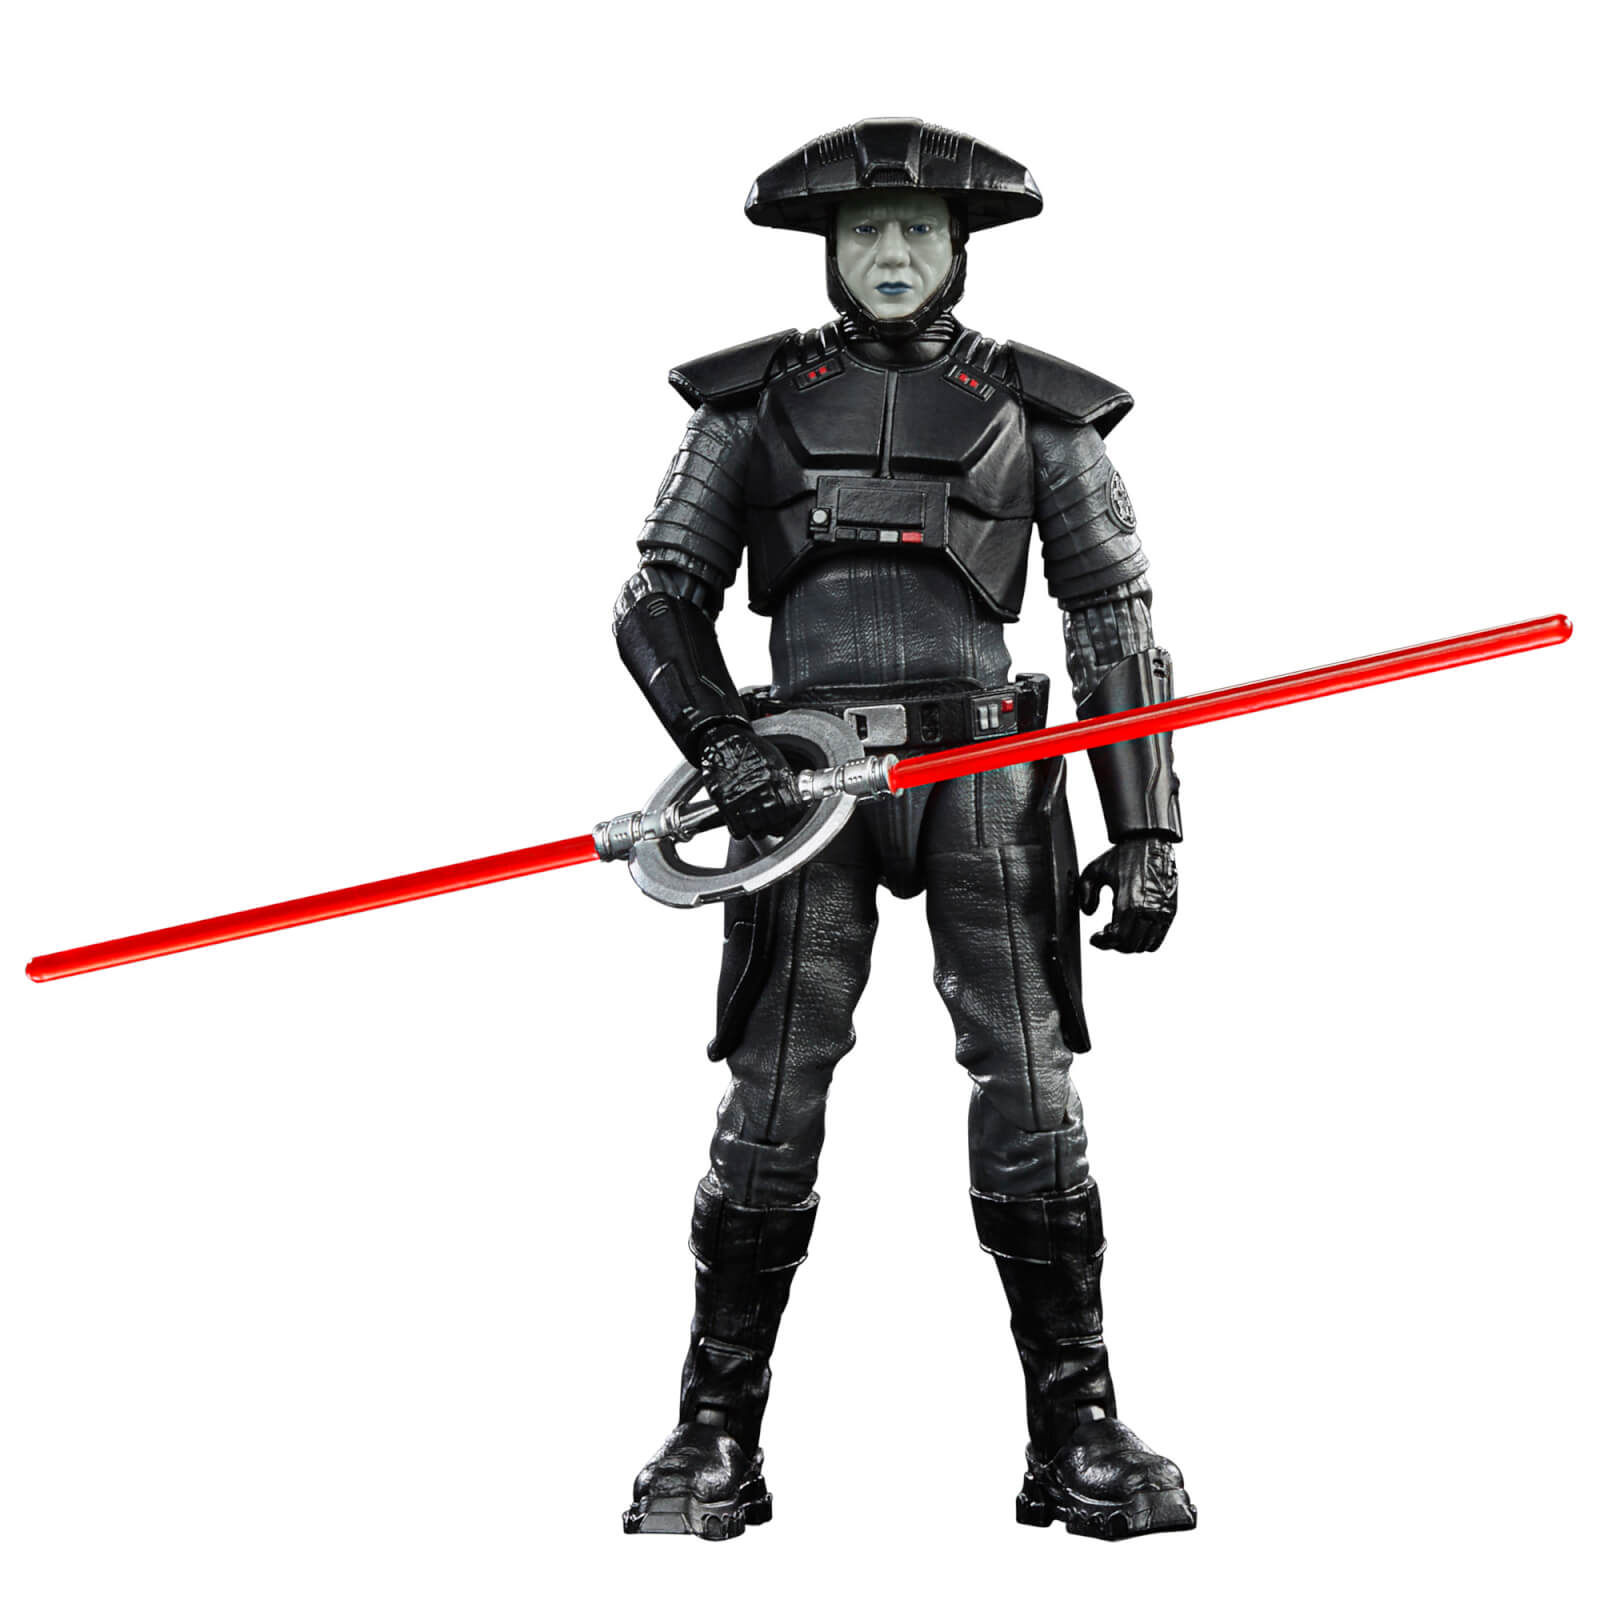 Hasbro Star Wars The Black Series Fifth Brother (Inquisitor) Action Figure